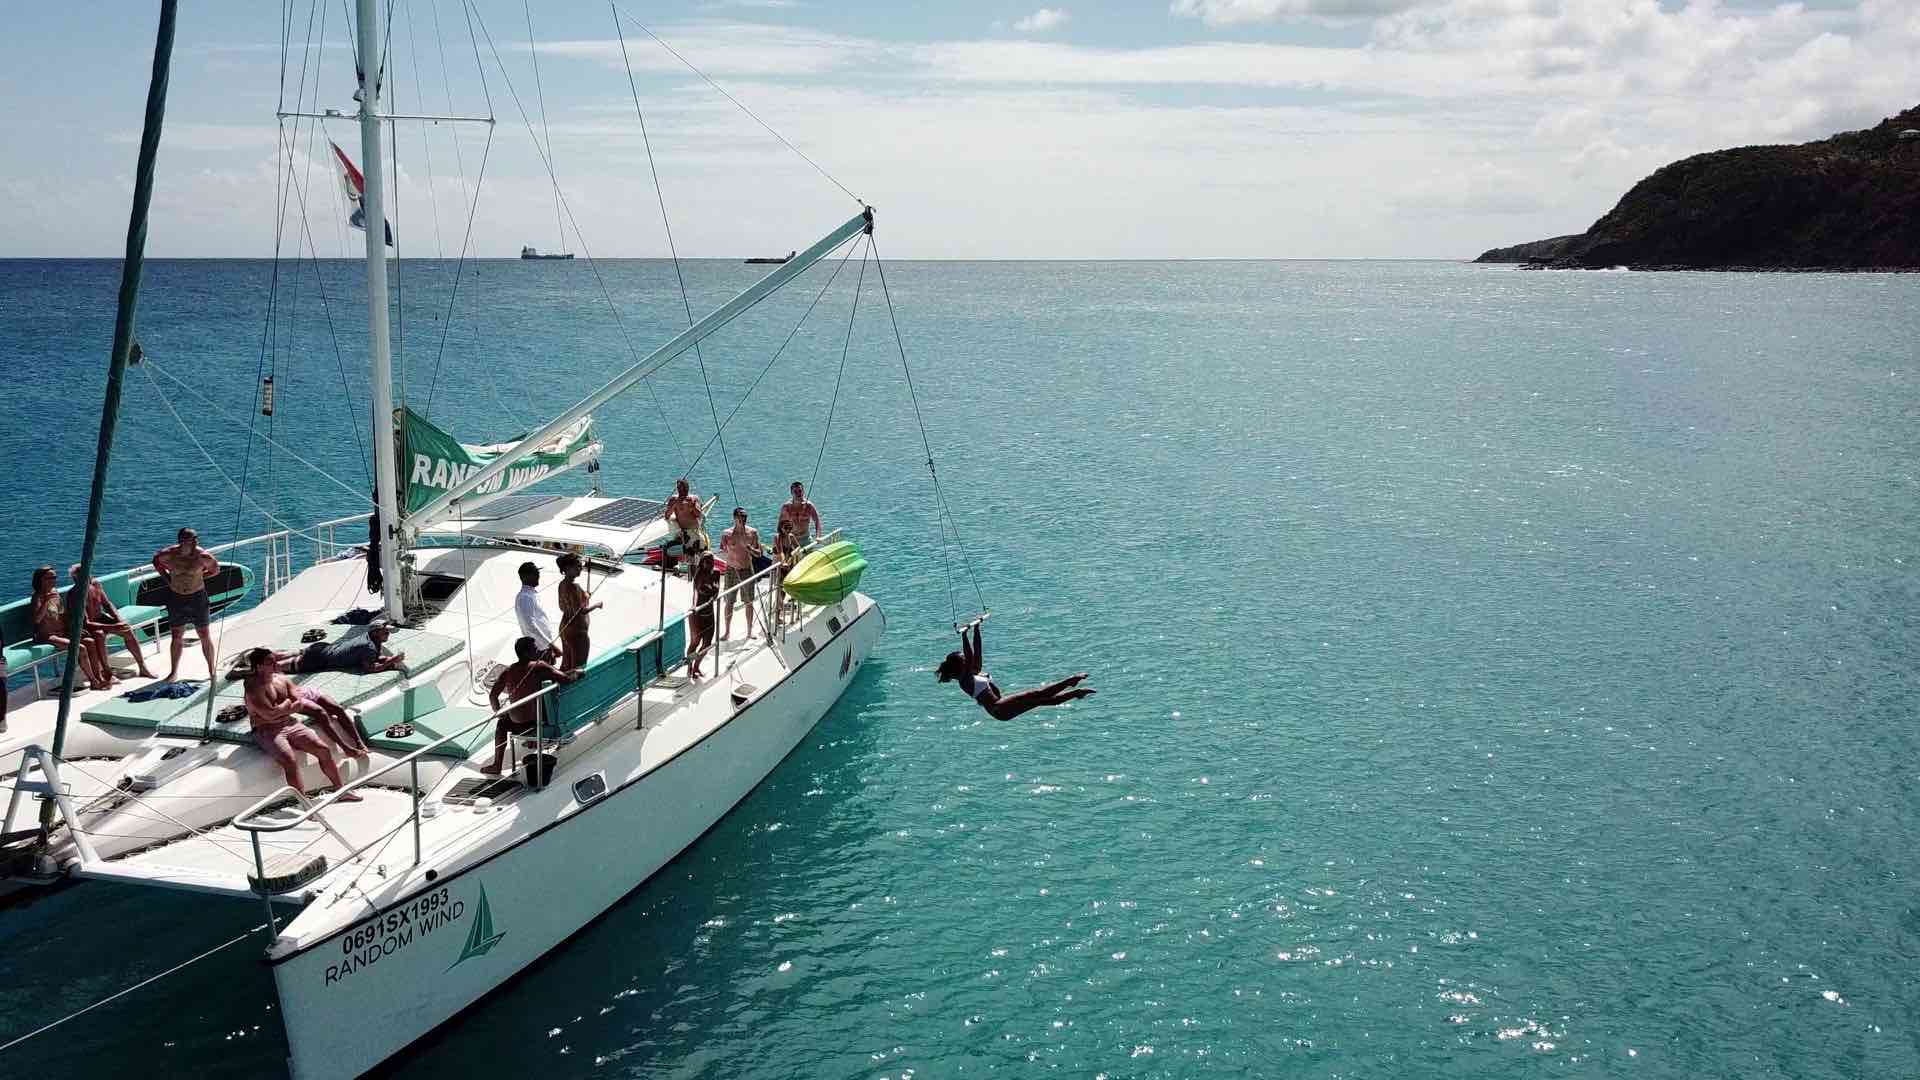 Random Wind Charters offer fun things to do in St Martin like sailing and jumping into the water off the boat using a swing